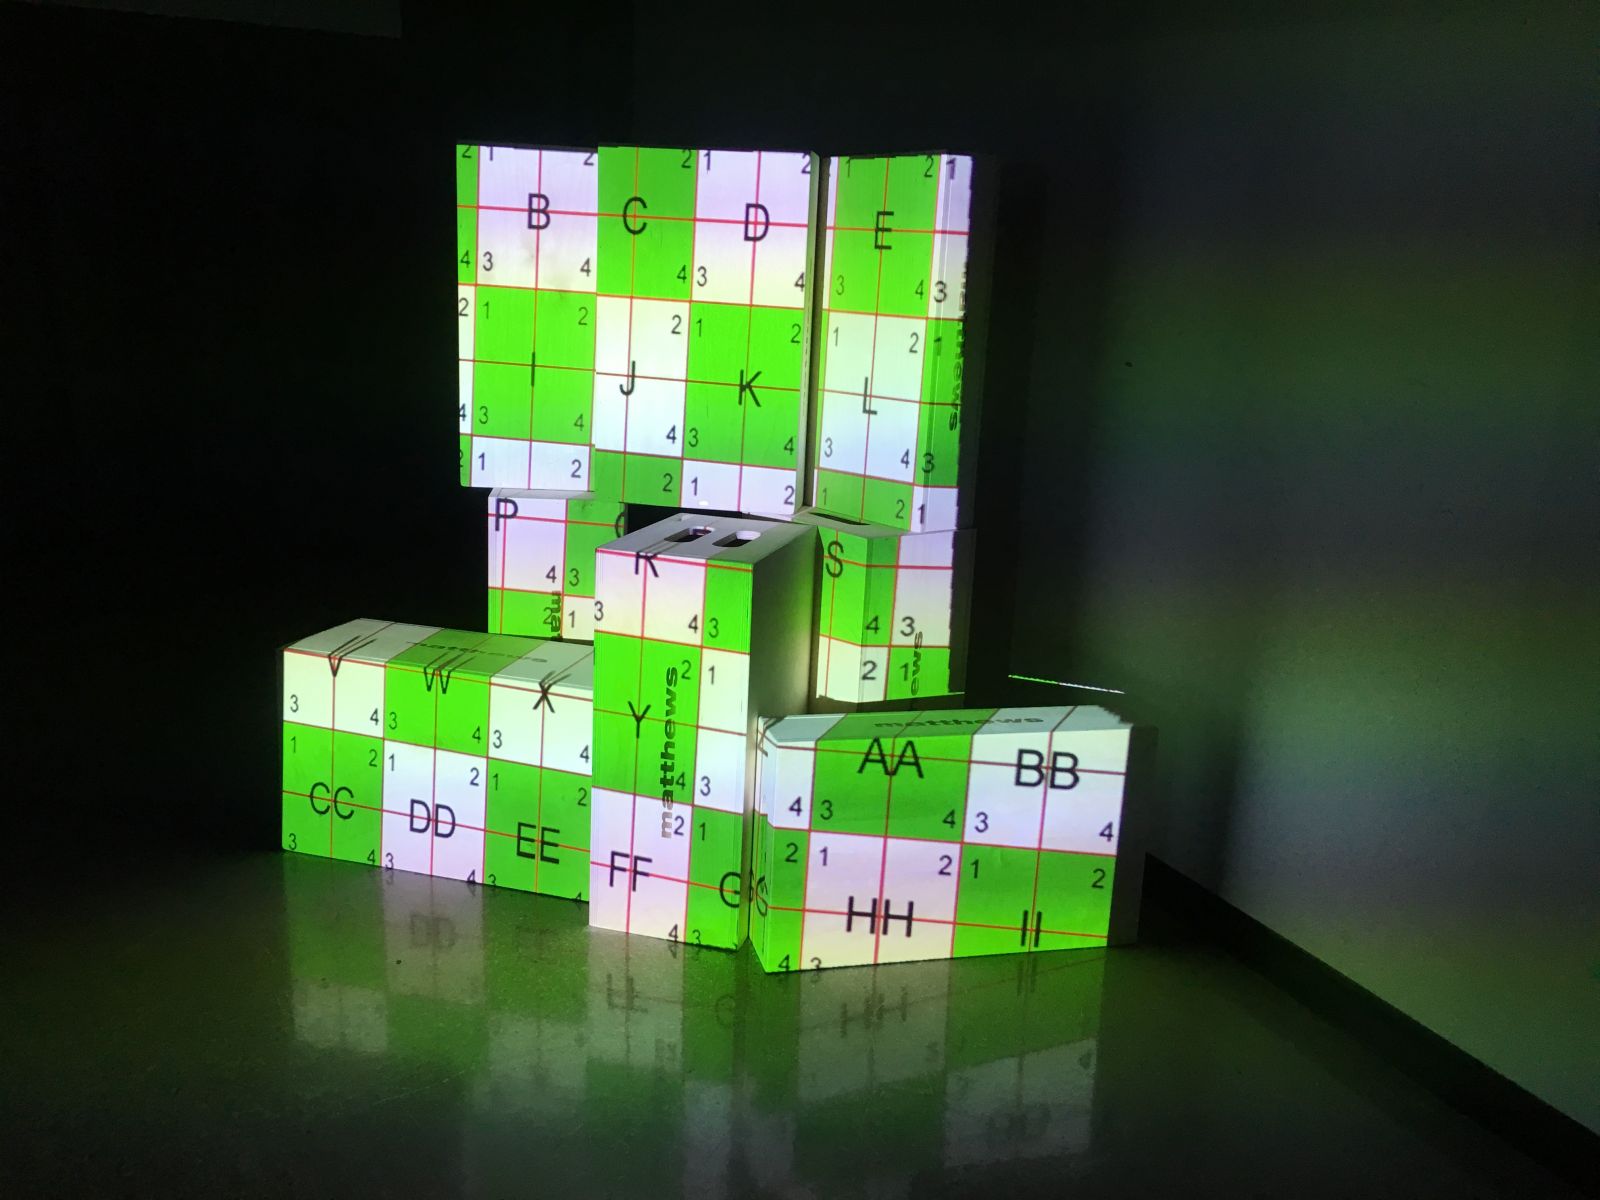 Projection of letters onto blocks